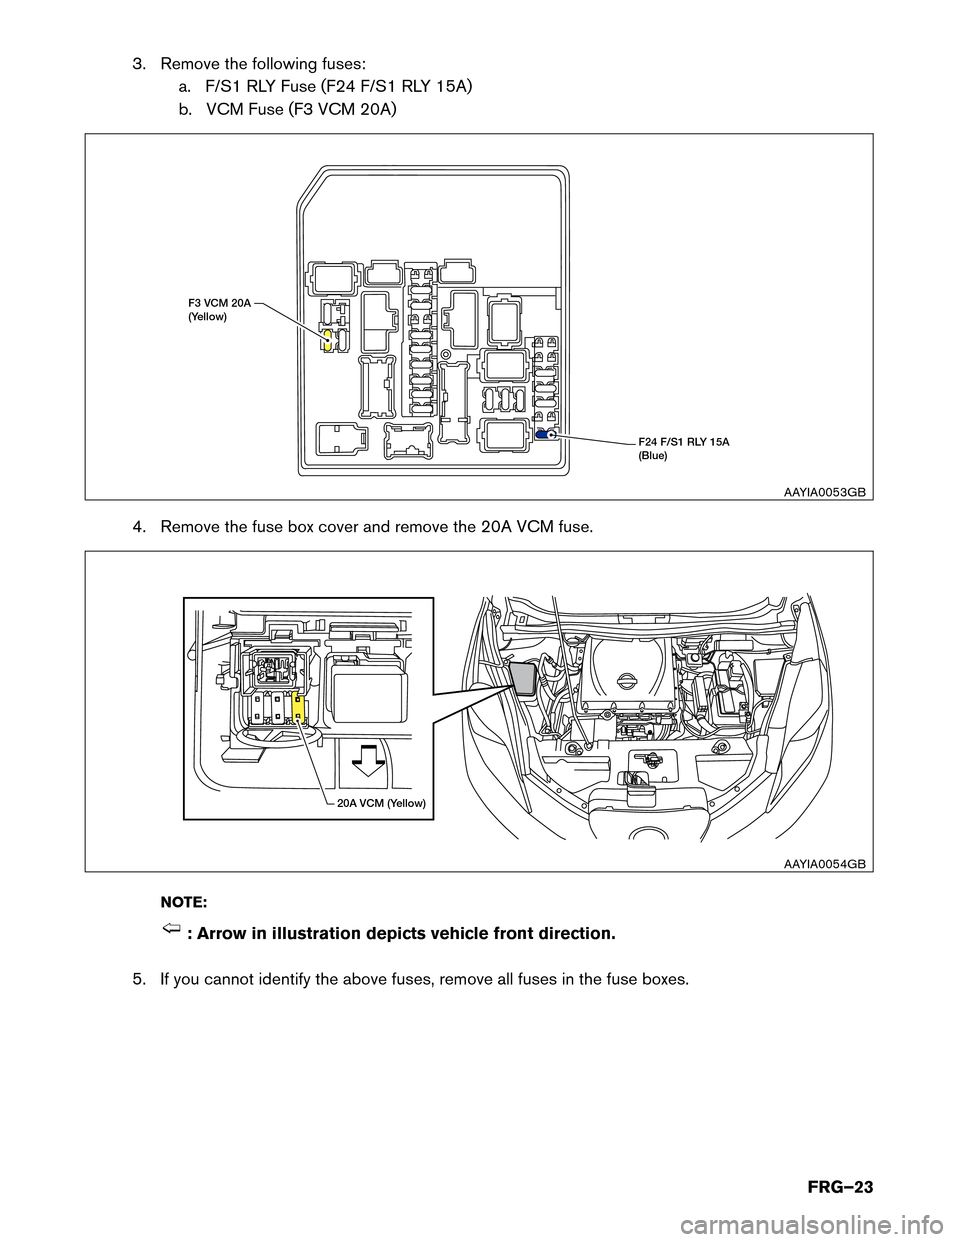 NISSAN LEAF 2016 1.G First Responders Guide 3. Remove the following fuses:
a. F/S1 RLY Fuse (F24 F/S1 RLY 15A)
b. VCM Fuse (F3 VCM 20A)
4. Remove the fuse box cover and remove the 20A VCM fuse. NOTE: : Arrow in illustration depicts vehicle fron